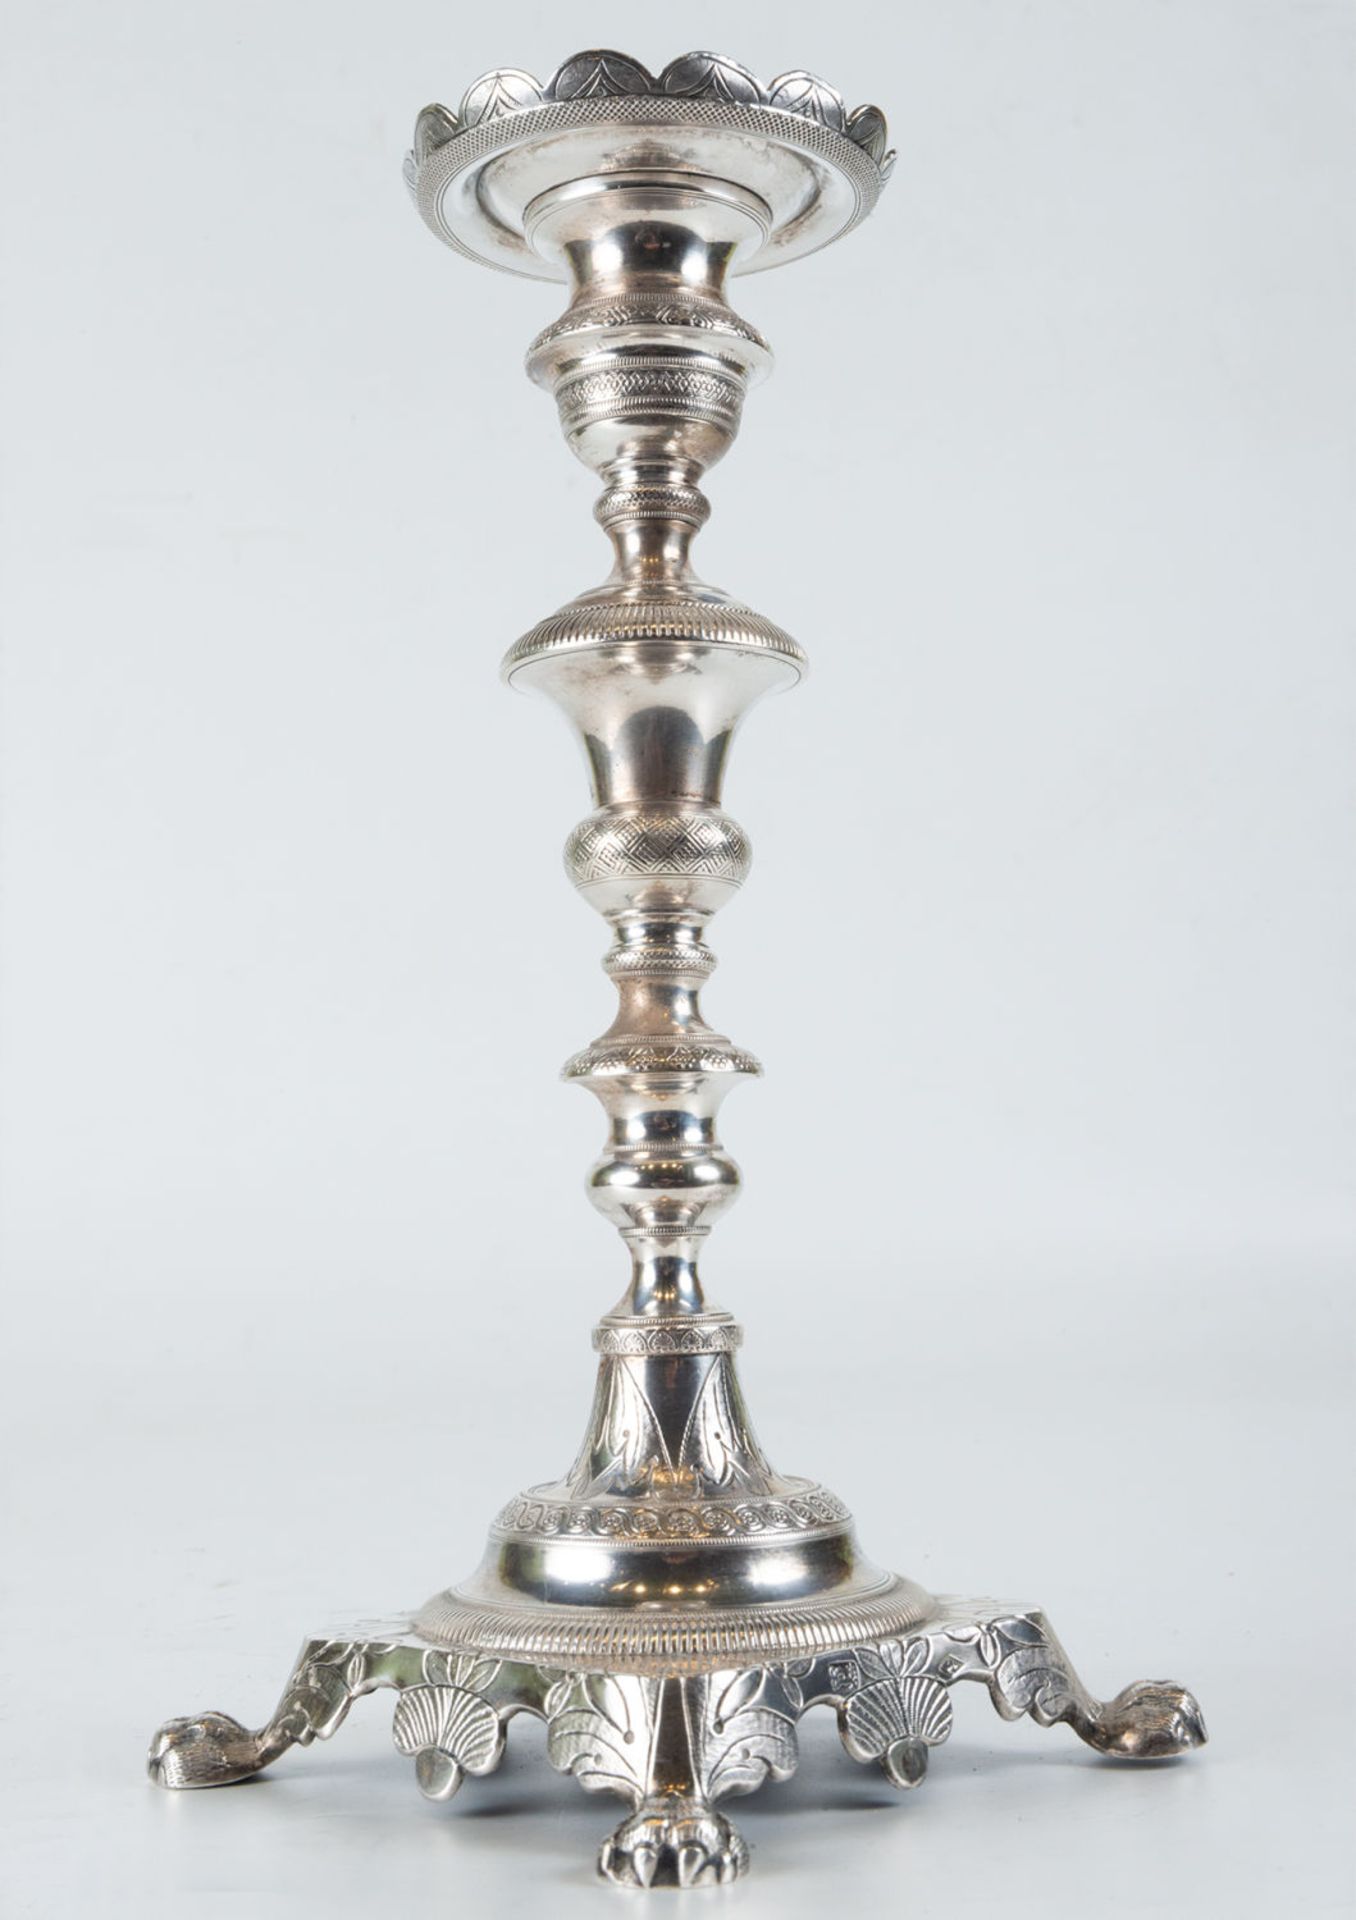 Pair of solid sterling silver candlesticks, 19th century - Image 6 of 9